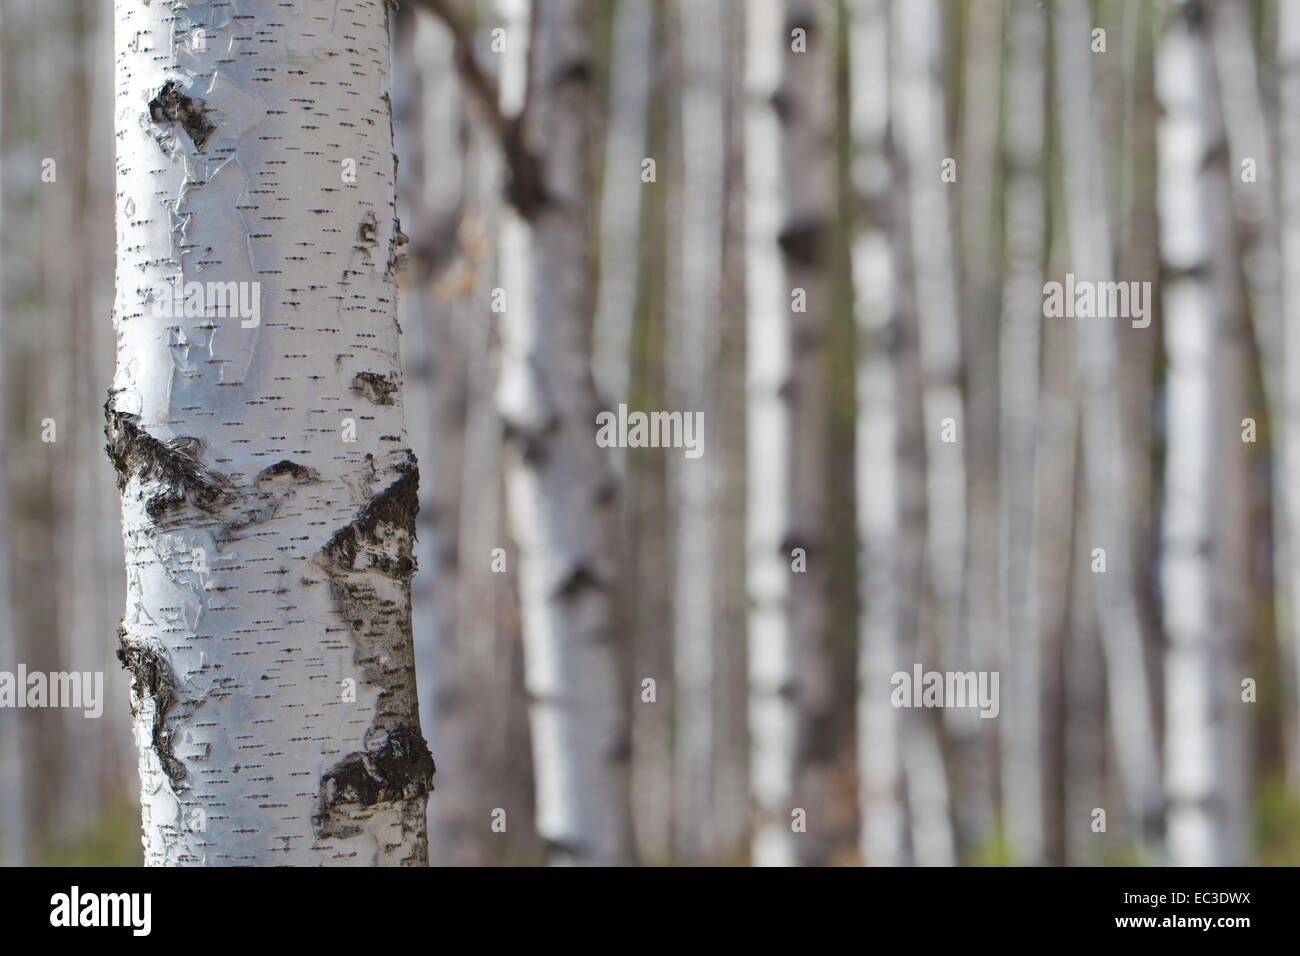 Birches in a bright spring day Stock Photo